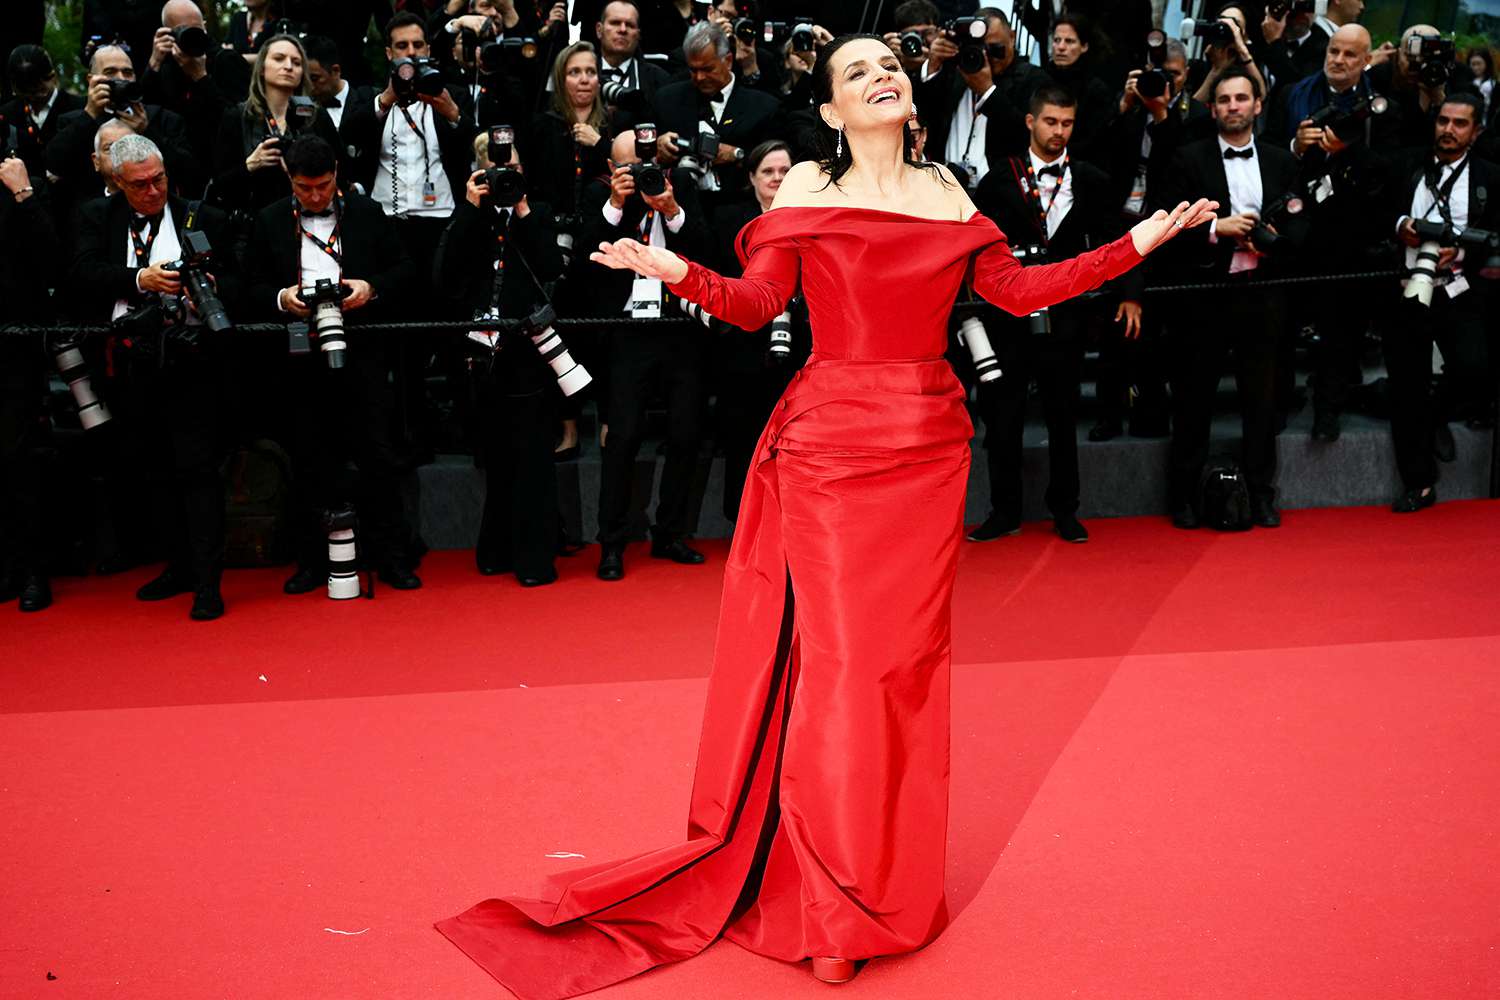 Juliette Binoche arrives for the Opening Ceremony and the screening of the film "Le Deuxieme Acte" at the 77th edition of the Cannes Film Festival in Cannes, southern France, on May 14, 2024.